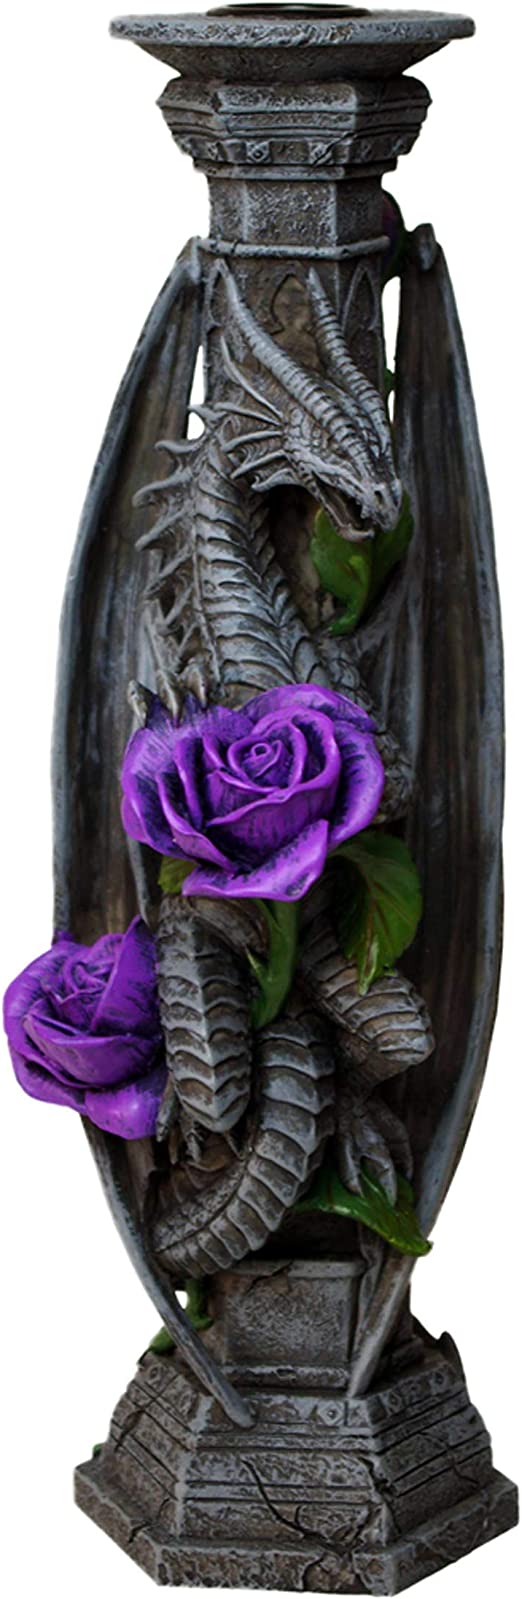 Nemesis Now Dragon Beauty Stick Anne Stokes Candle Holder NOW6853, Grey, Resin, One Size